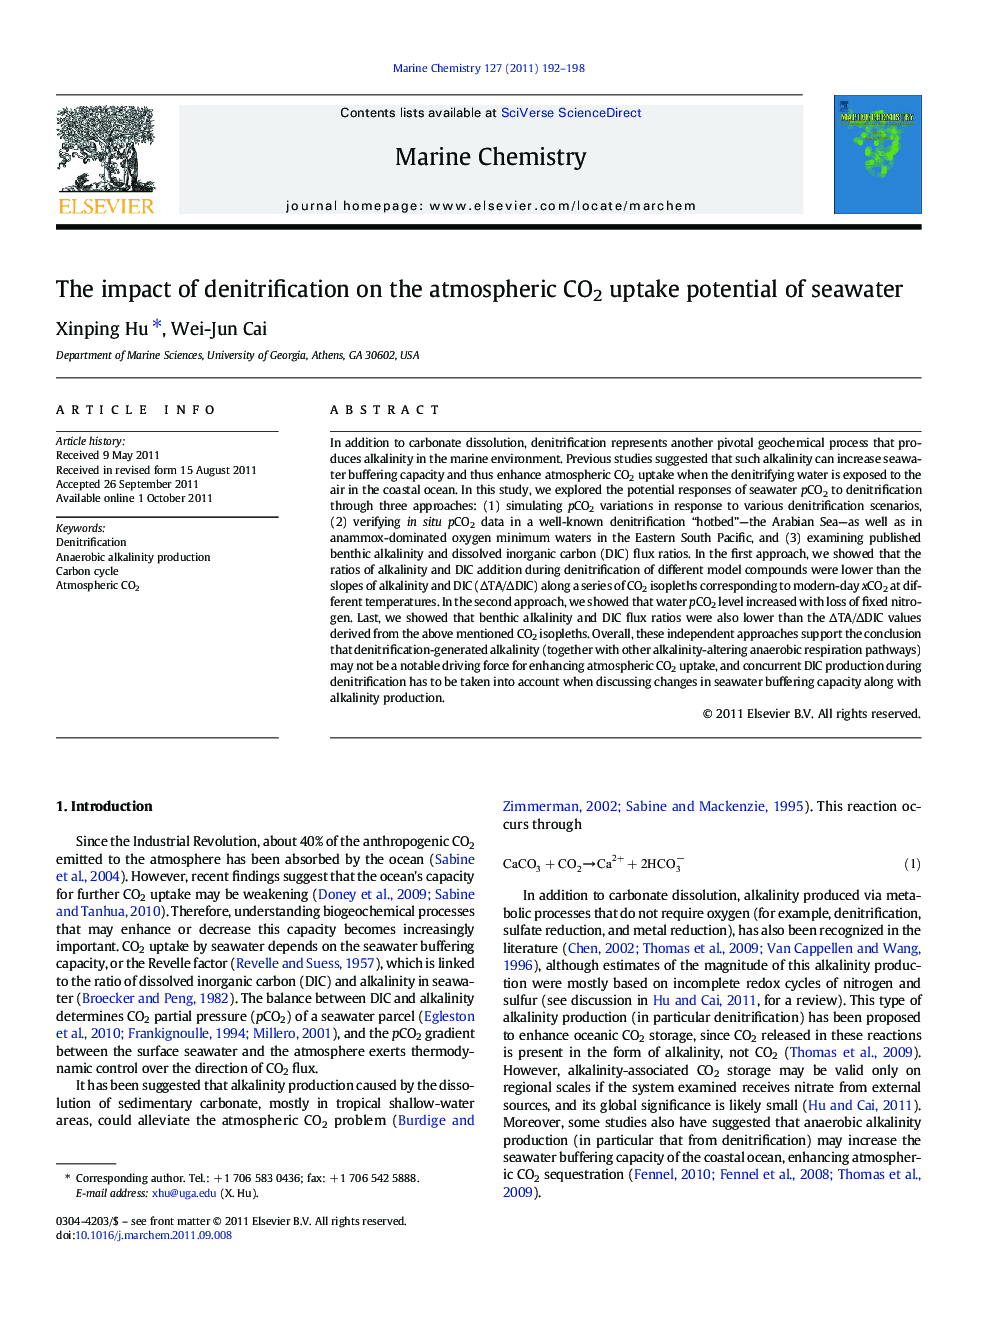 The impact of denitrification on the atmospheric CO2 uptake potential of seawater